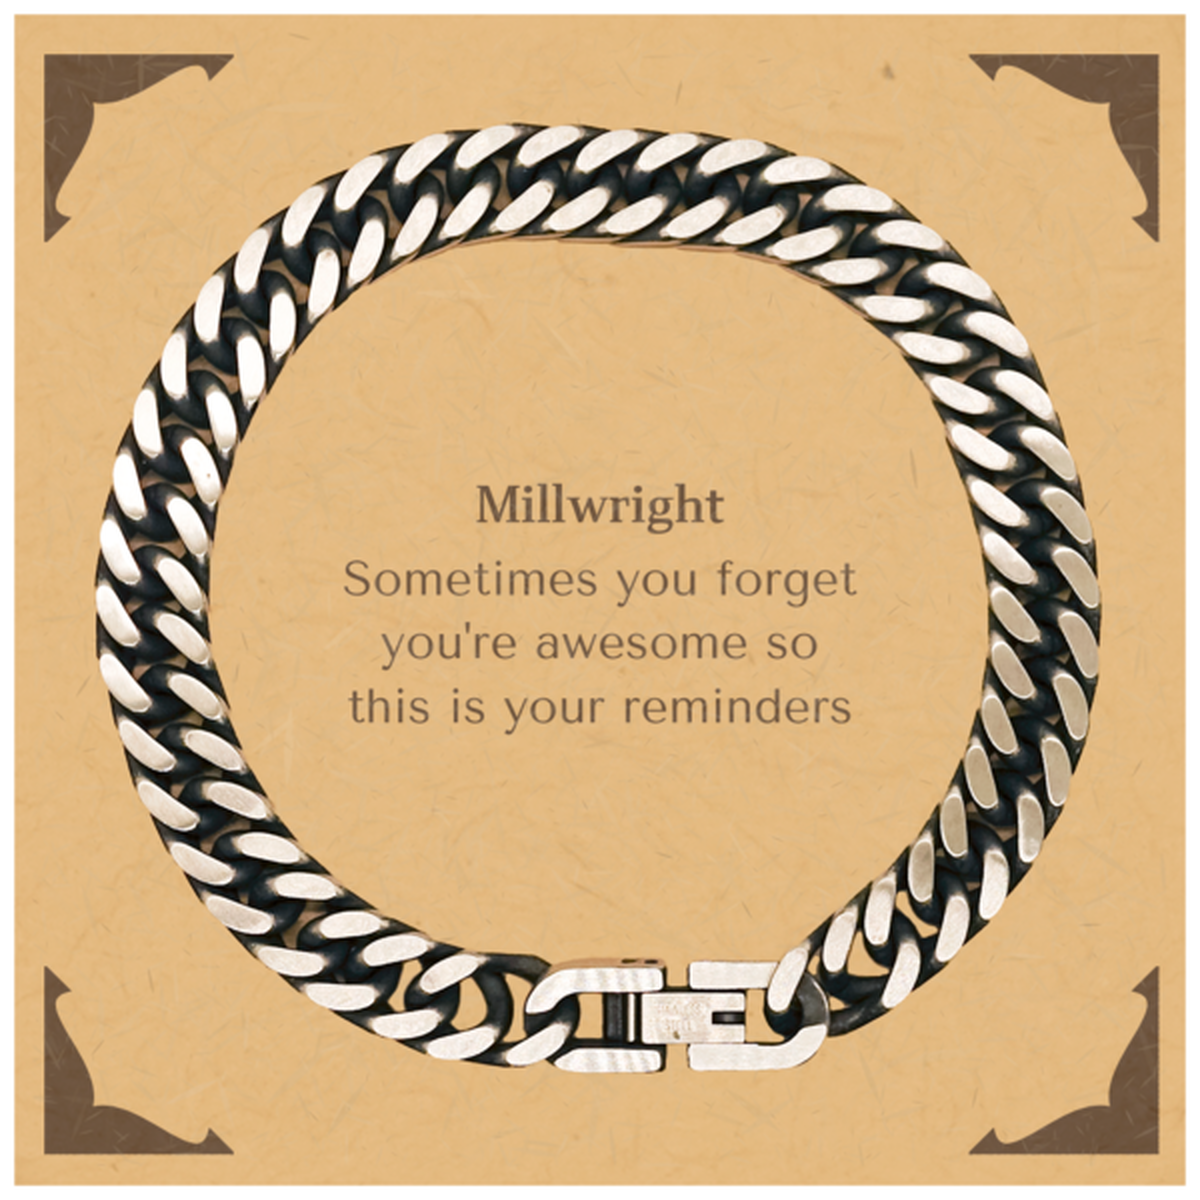 Sentimental Millwright Cuban Link Chain Bracelet, Millwright Sometimes you forget you're awesome so this is your reminders, Graduation Christmas Birthday Gifts for Millwright, Men, Women, Coworkers